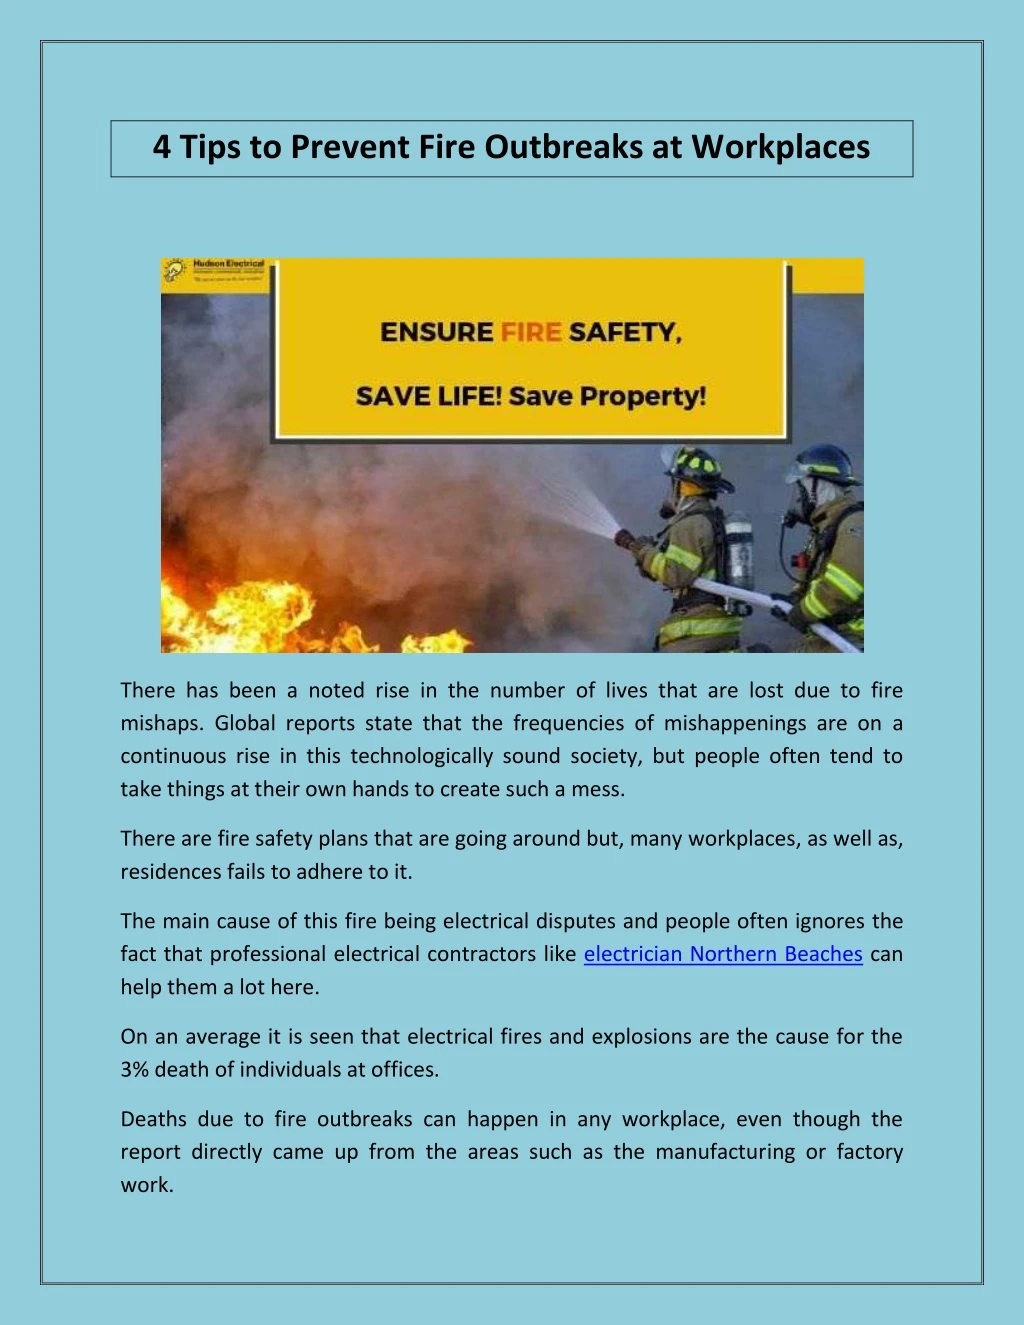 4 tips to prevent fire outbreaks at workplaces